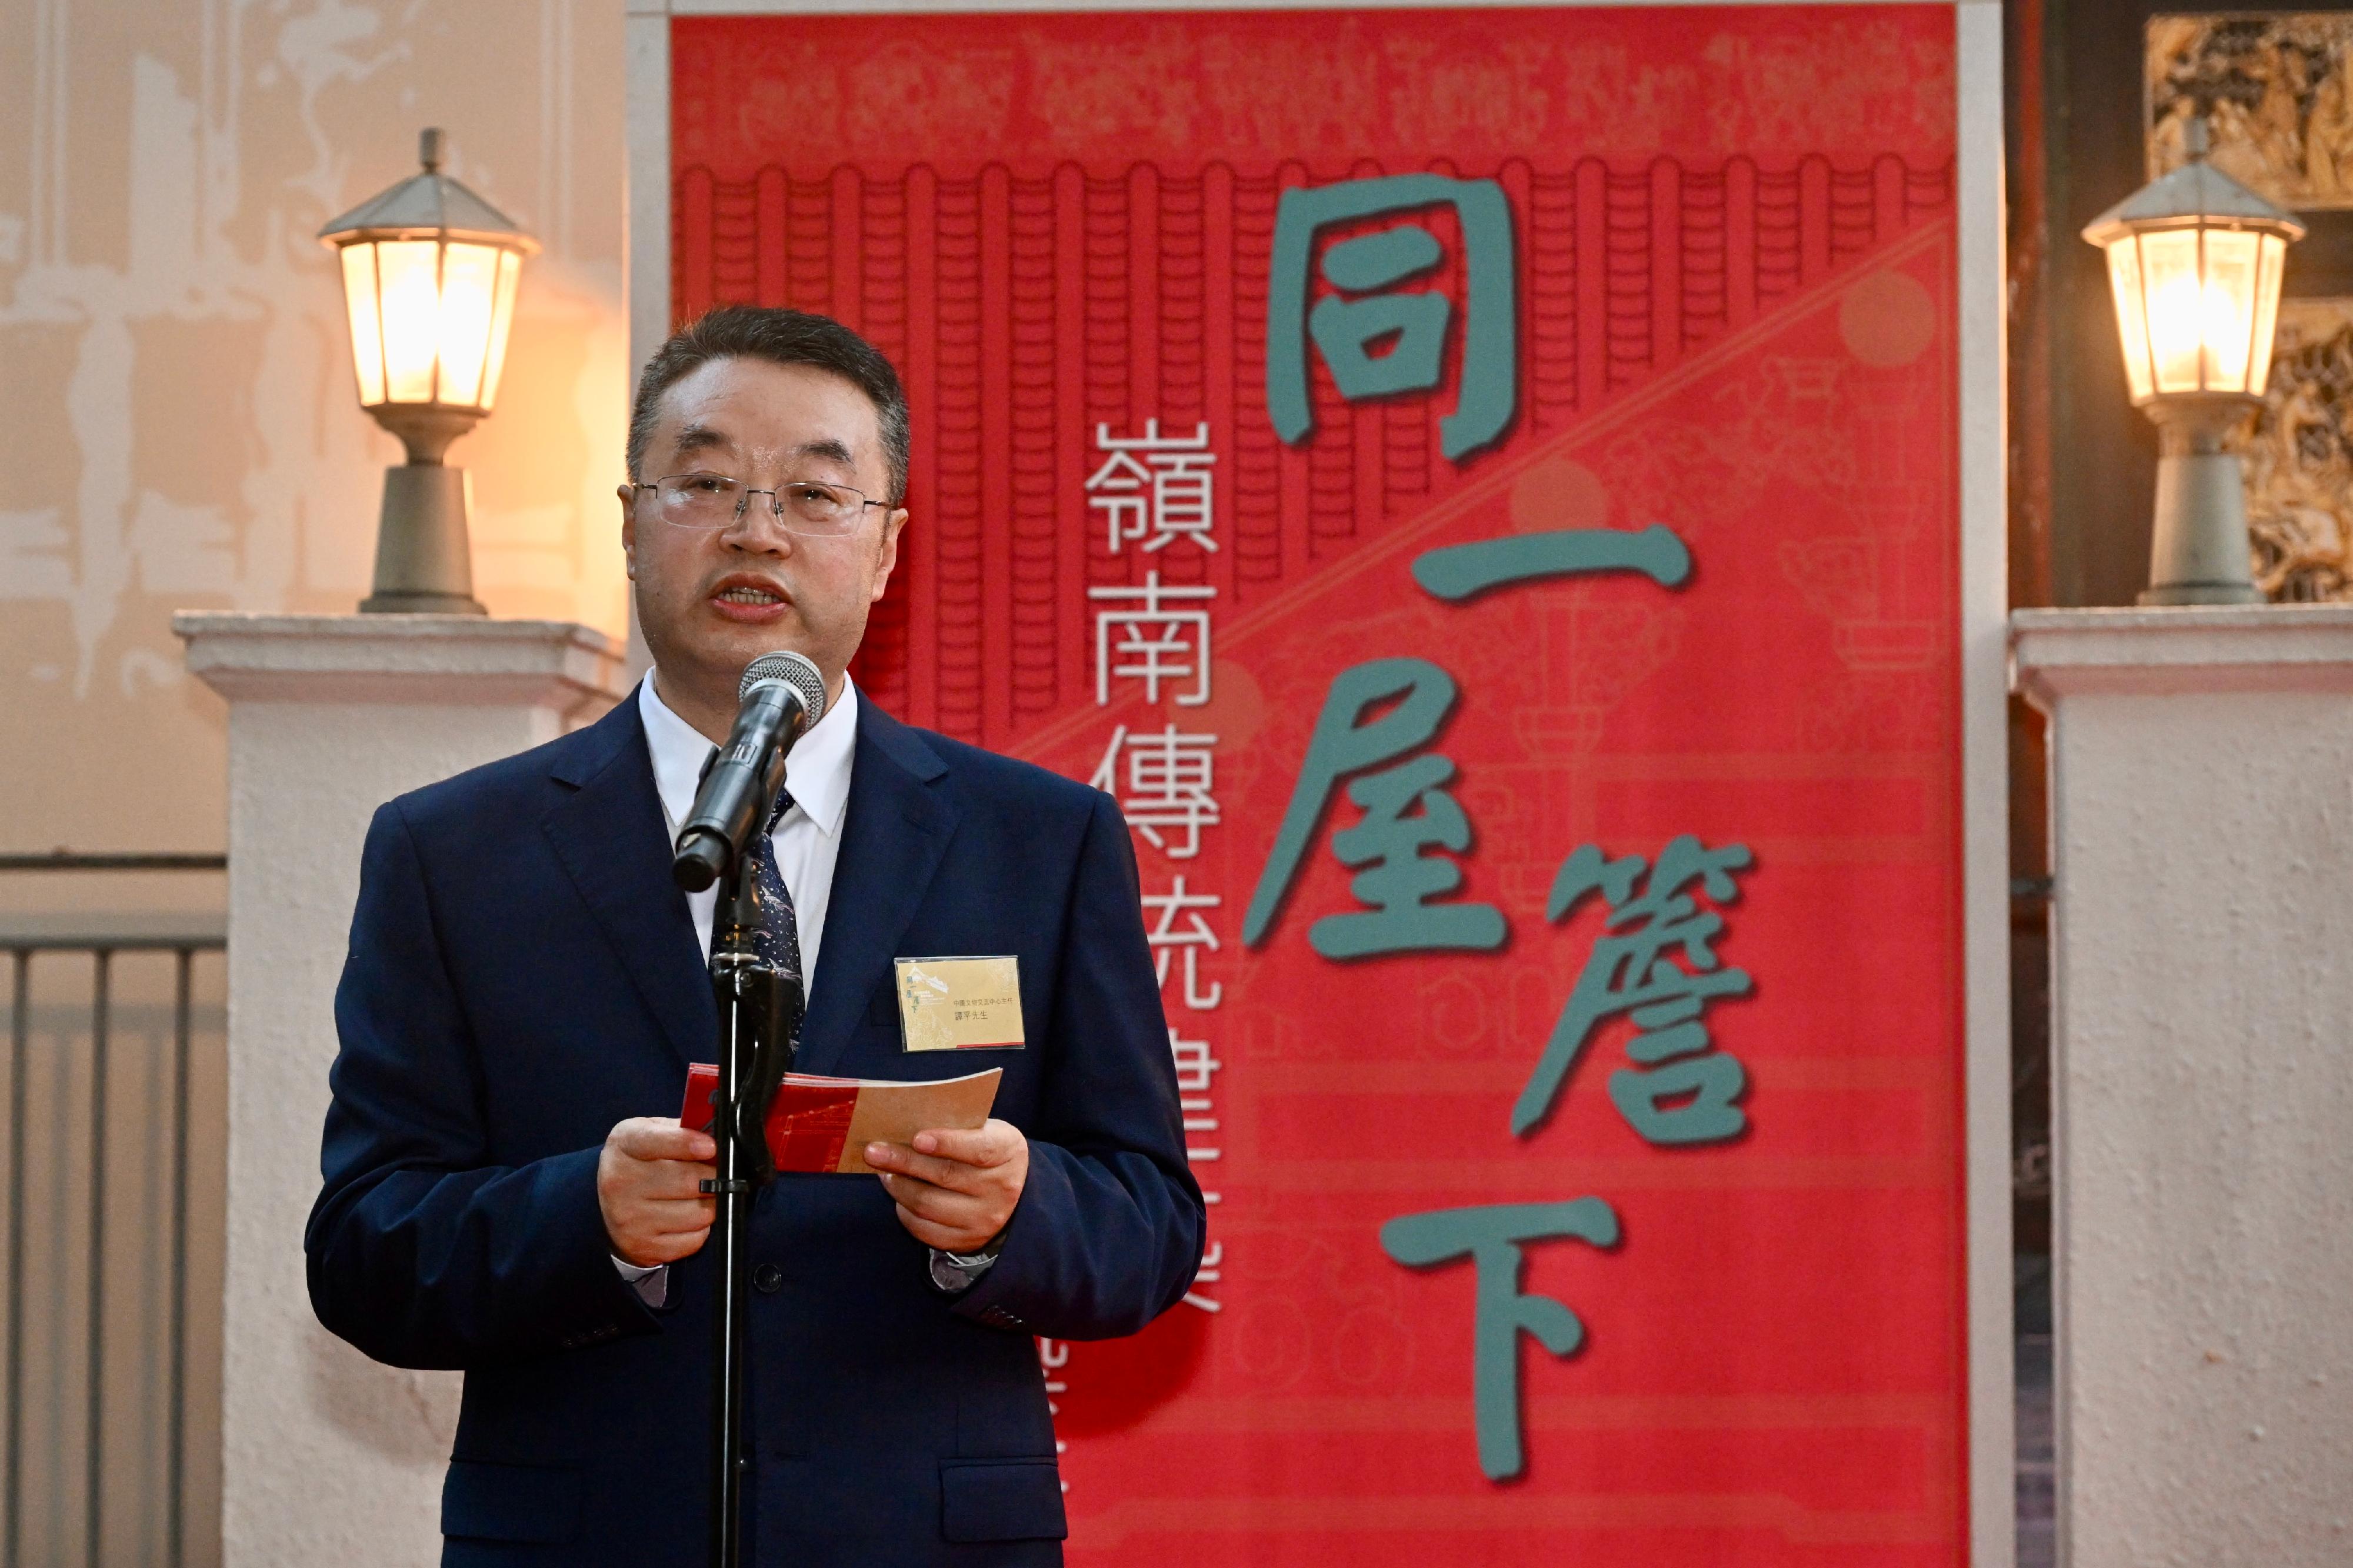 The "Under the Same Roof: Origin and Art of Lingnan Traditional Architecture" exhibition officially opened today (December 12). Photo shows the Director of Art Exhibitions China, Mr Tan Ping, giving a speech at the opening ceremony.